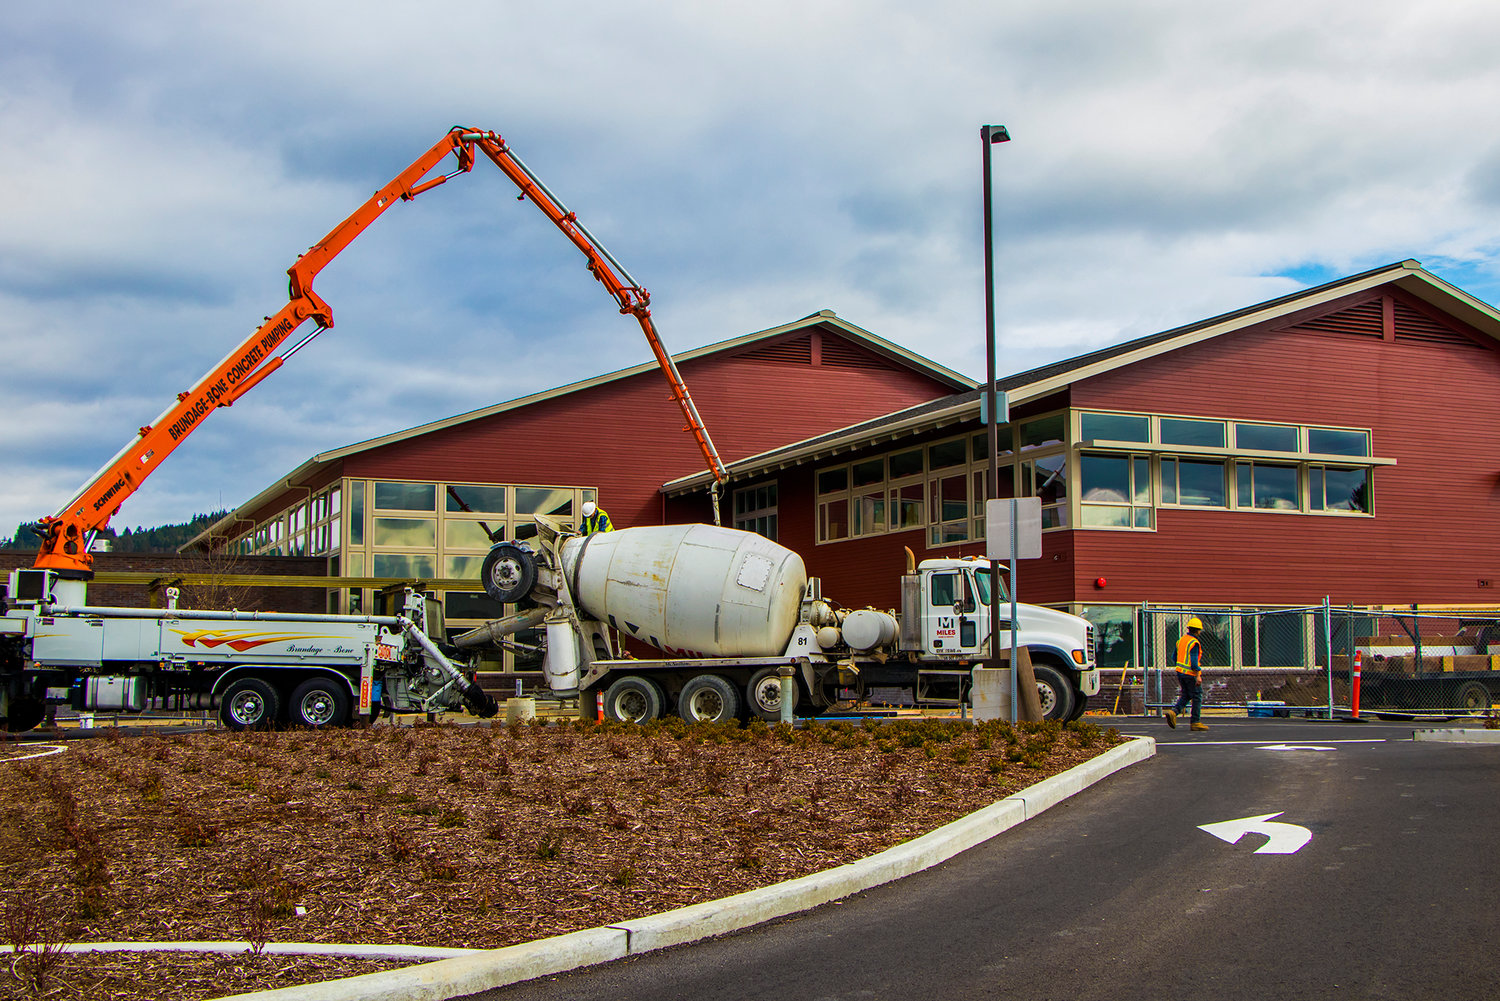 Crews continue construction on the Orin C. Smith Elementary building Thursday afternoon in Chehalis.